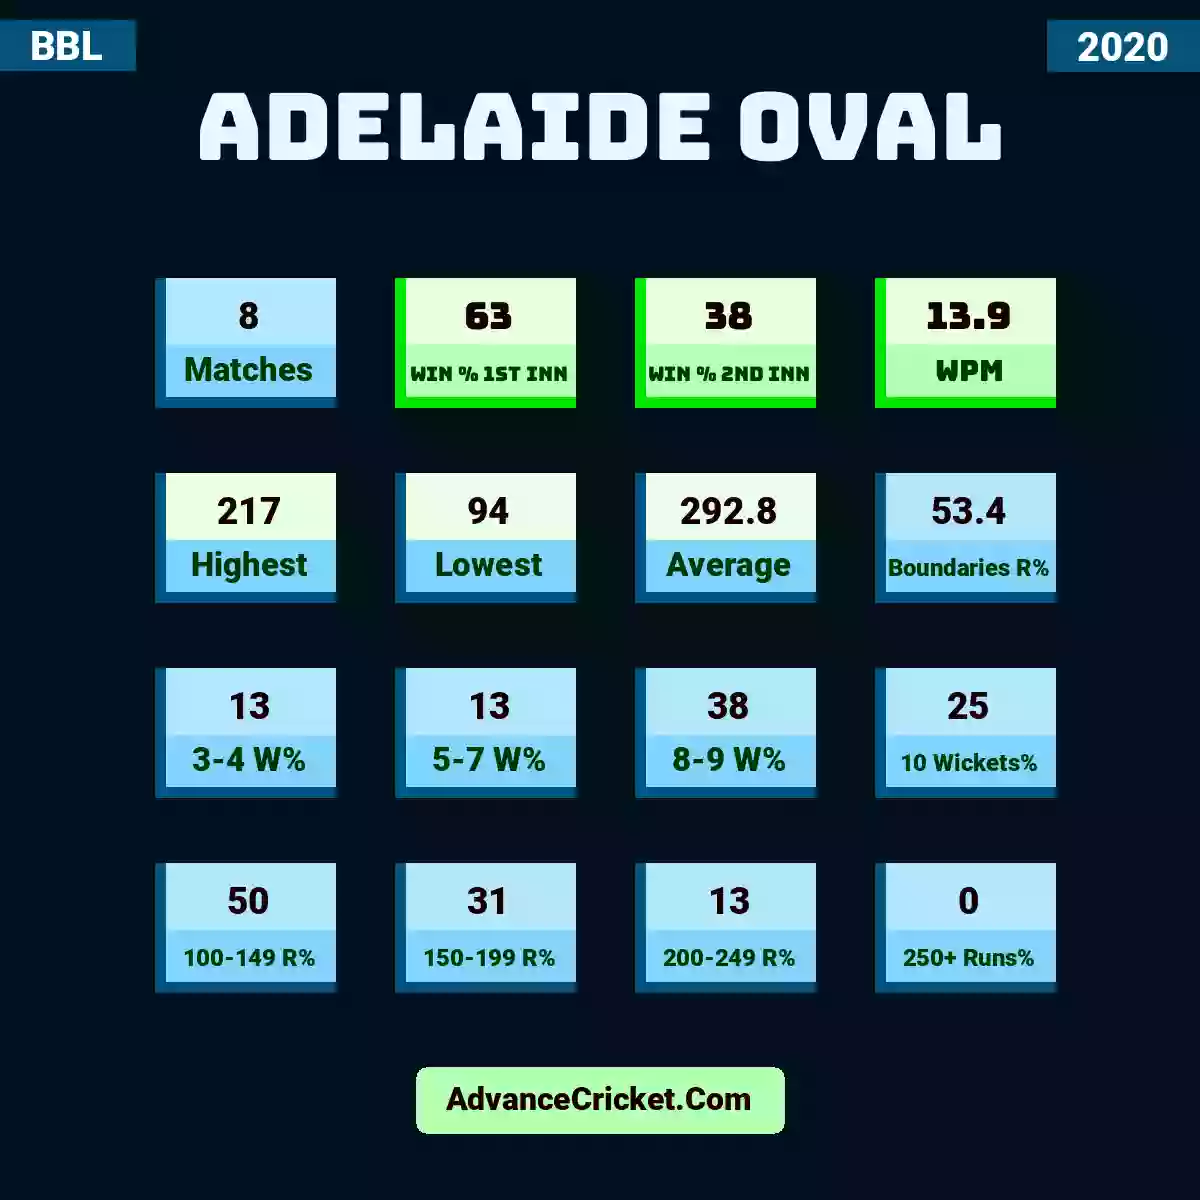 Image showing Adelaide Oval with Matches: 8, Win % 1st Inn: 63, Win % 2nd Inn: 38, WPM: 13.9, Highest: 217, Lowest: 94, Average: 292.8, Boundaries R%: 53.4, 3-4 W%: 13, 5-7 W%: 13, 8-9 W%: 38, 10 Wickets%: 25, 100-149 R%: 50, 150-199 R%: 31, 200-249 R%: 13, 250+ Runs%: 0.